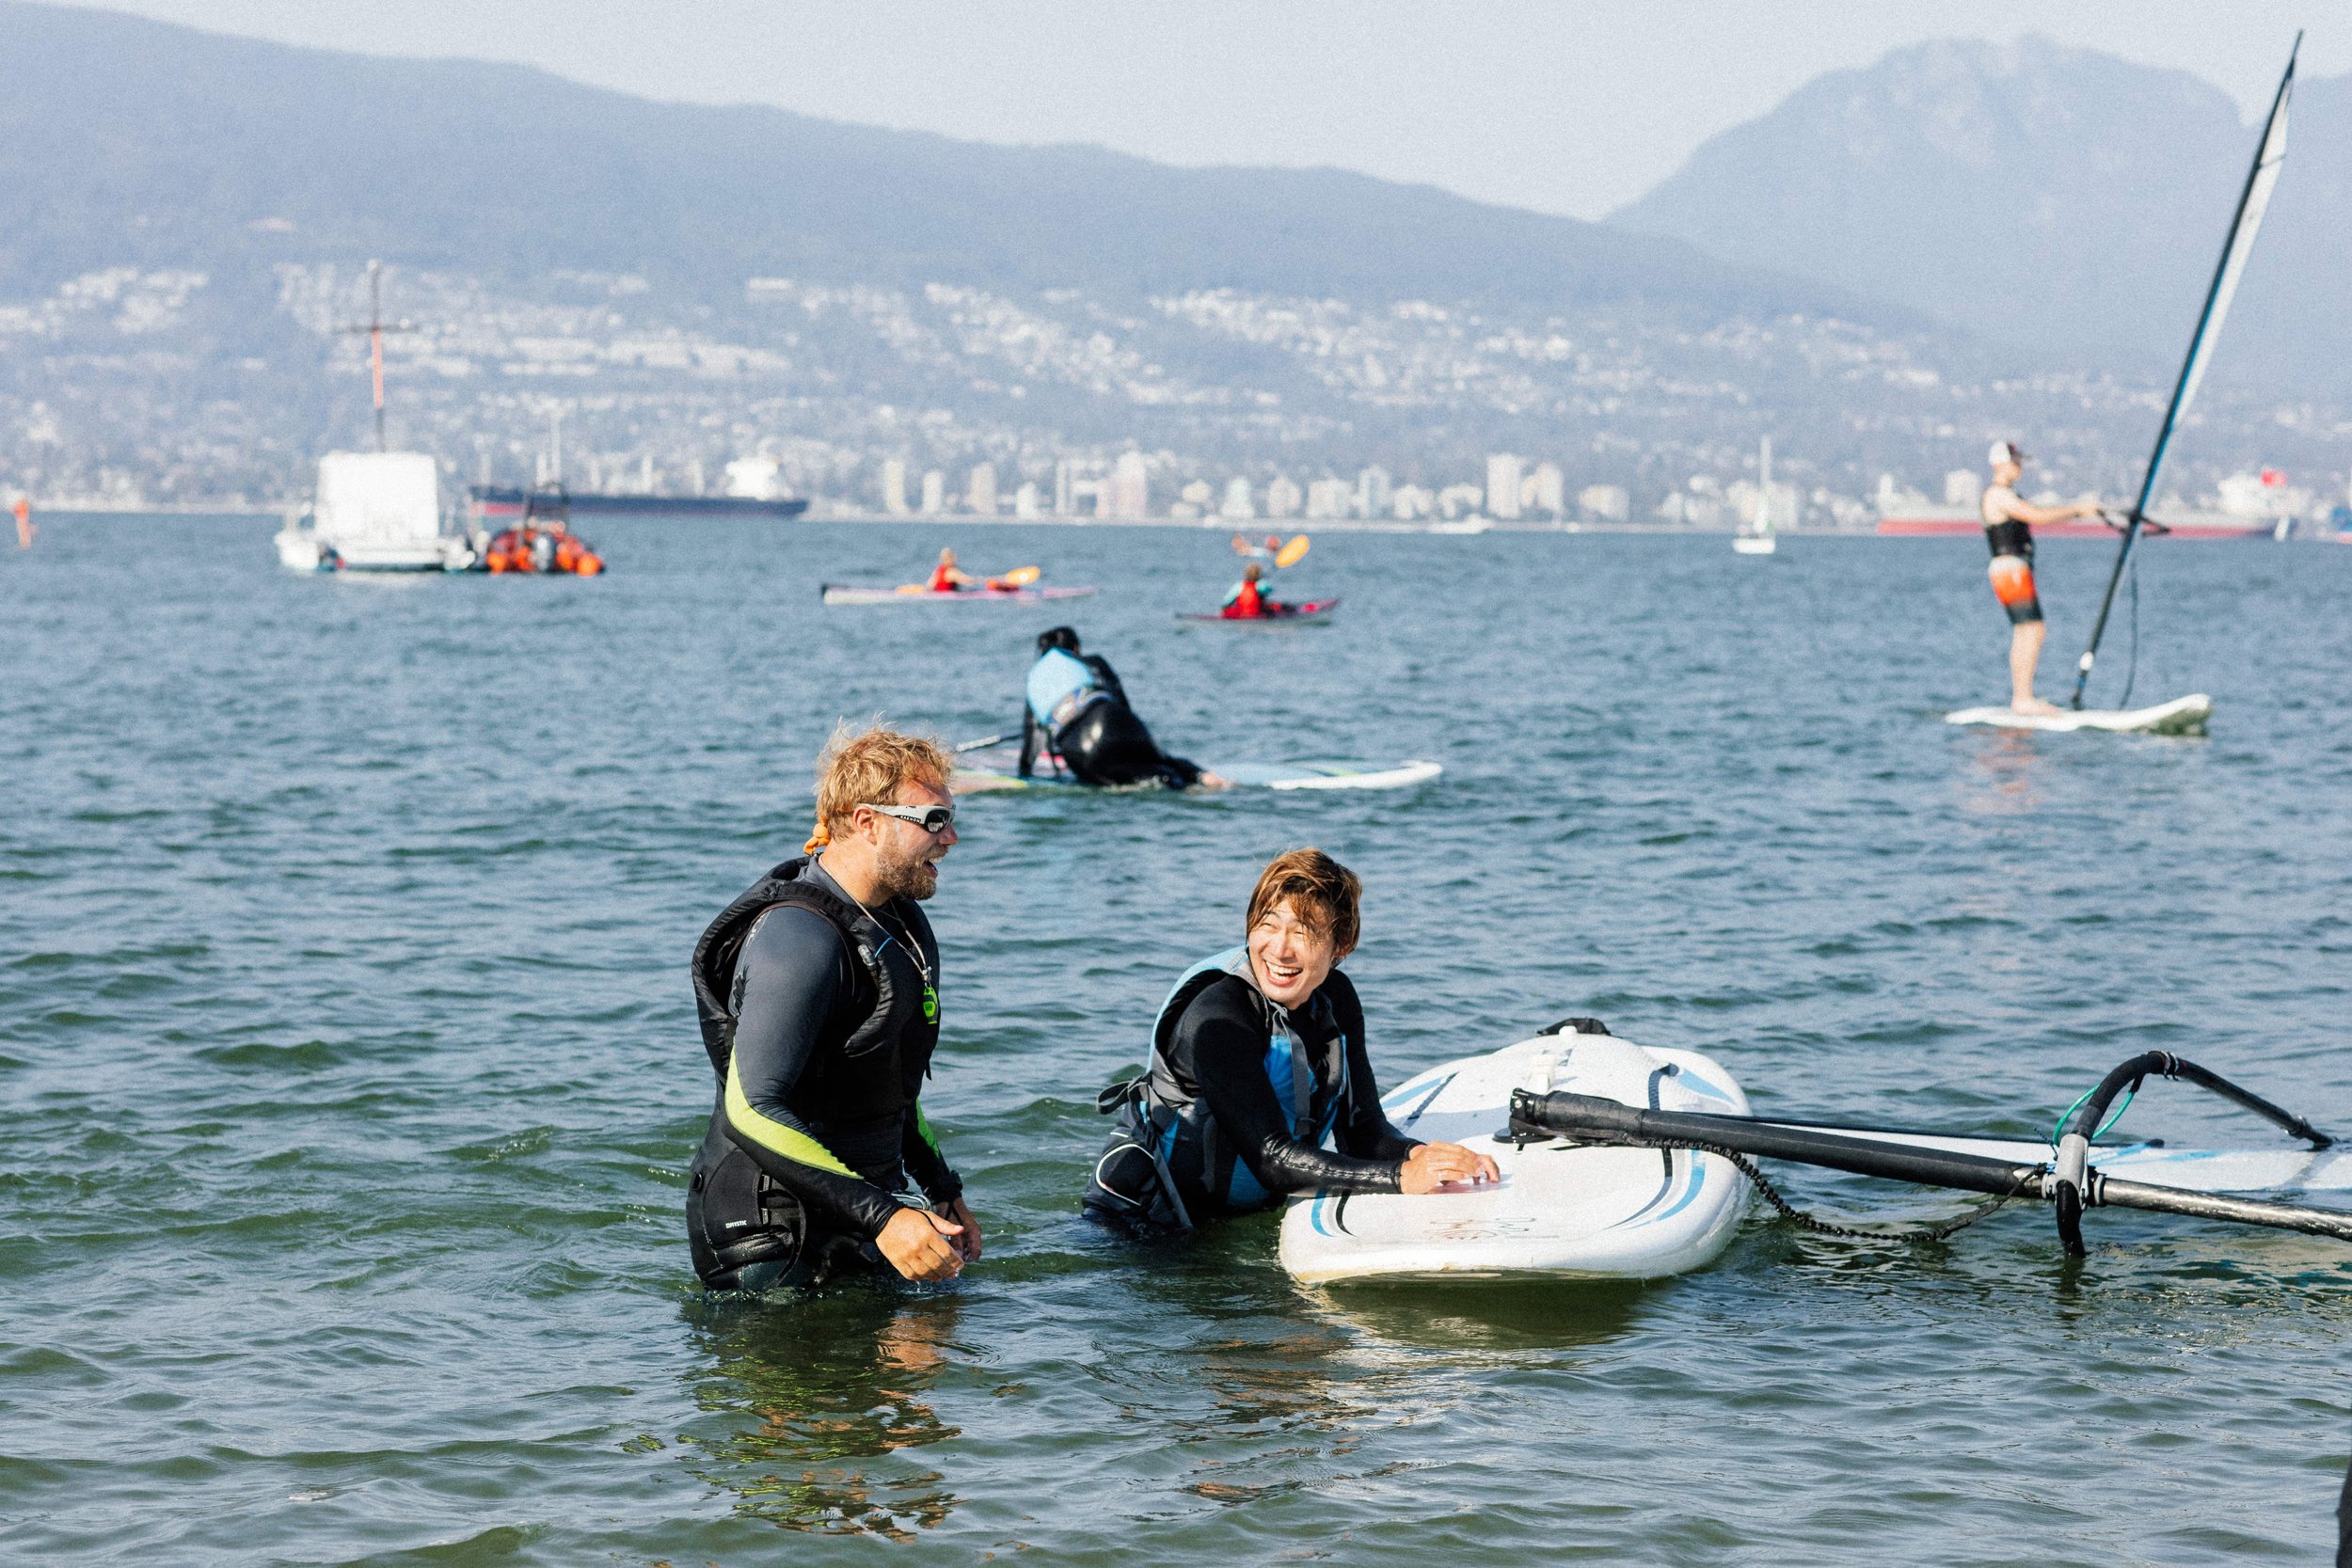 watersport lessons in vancouver